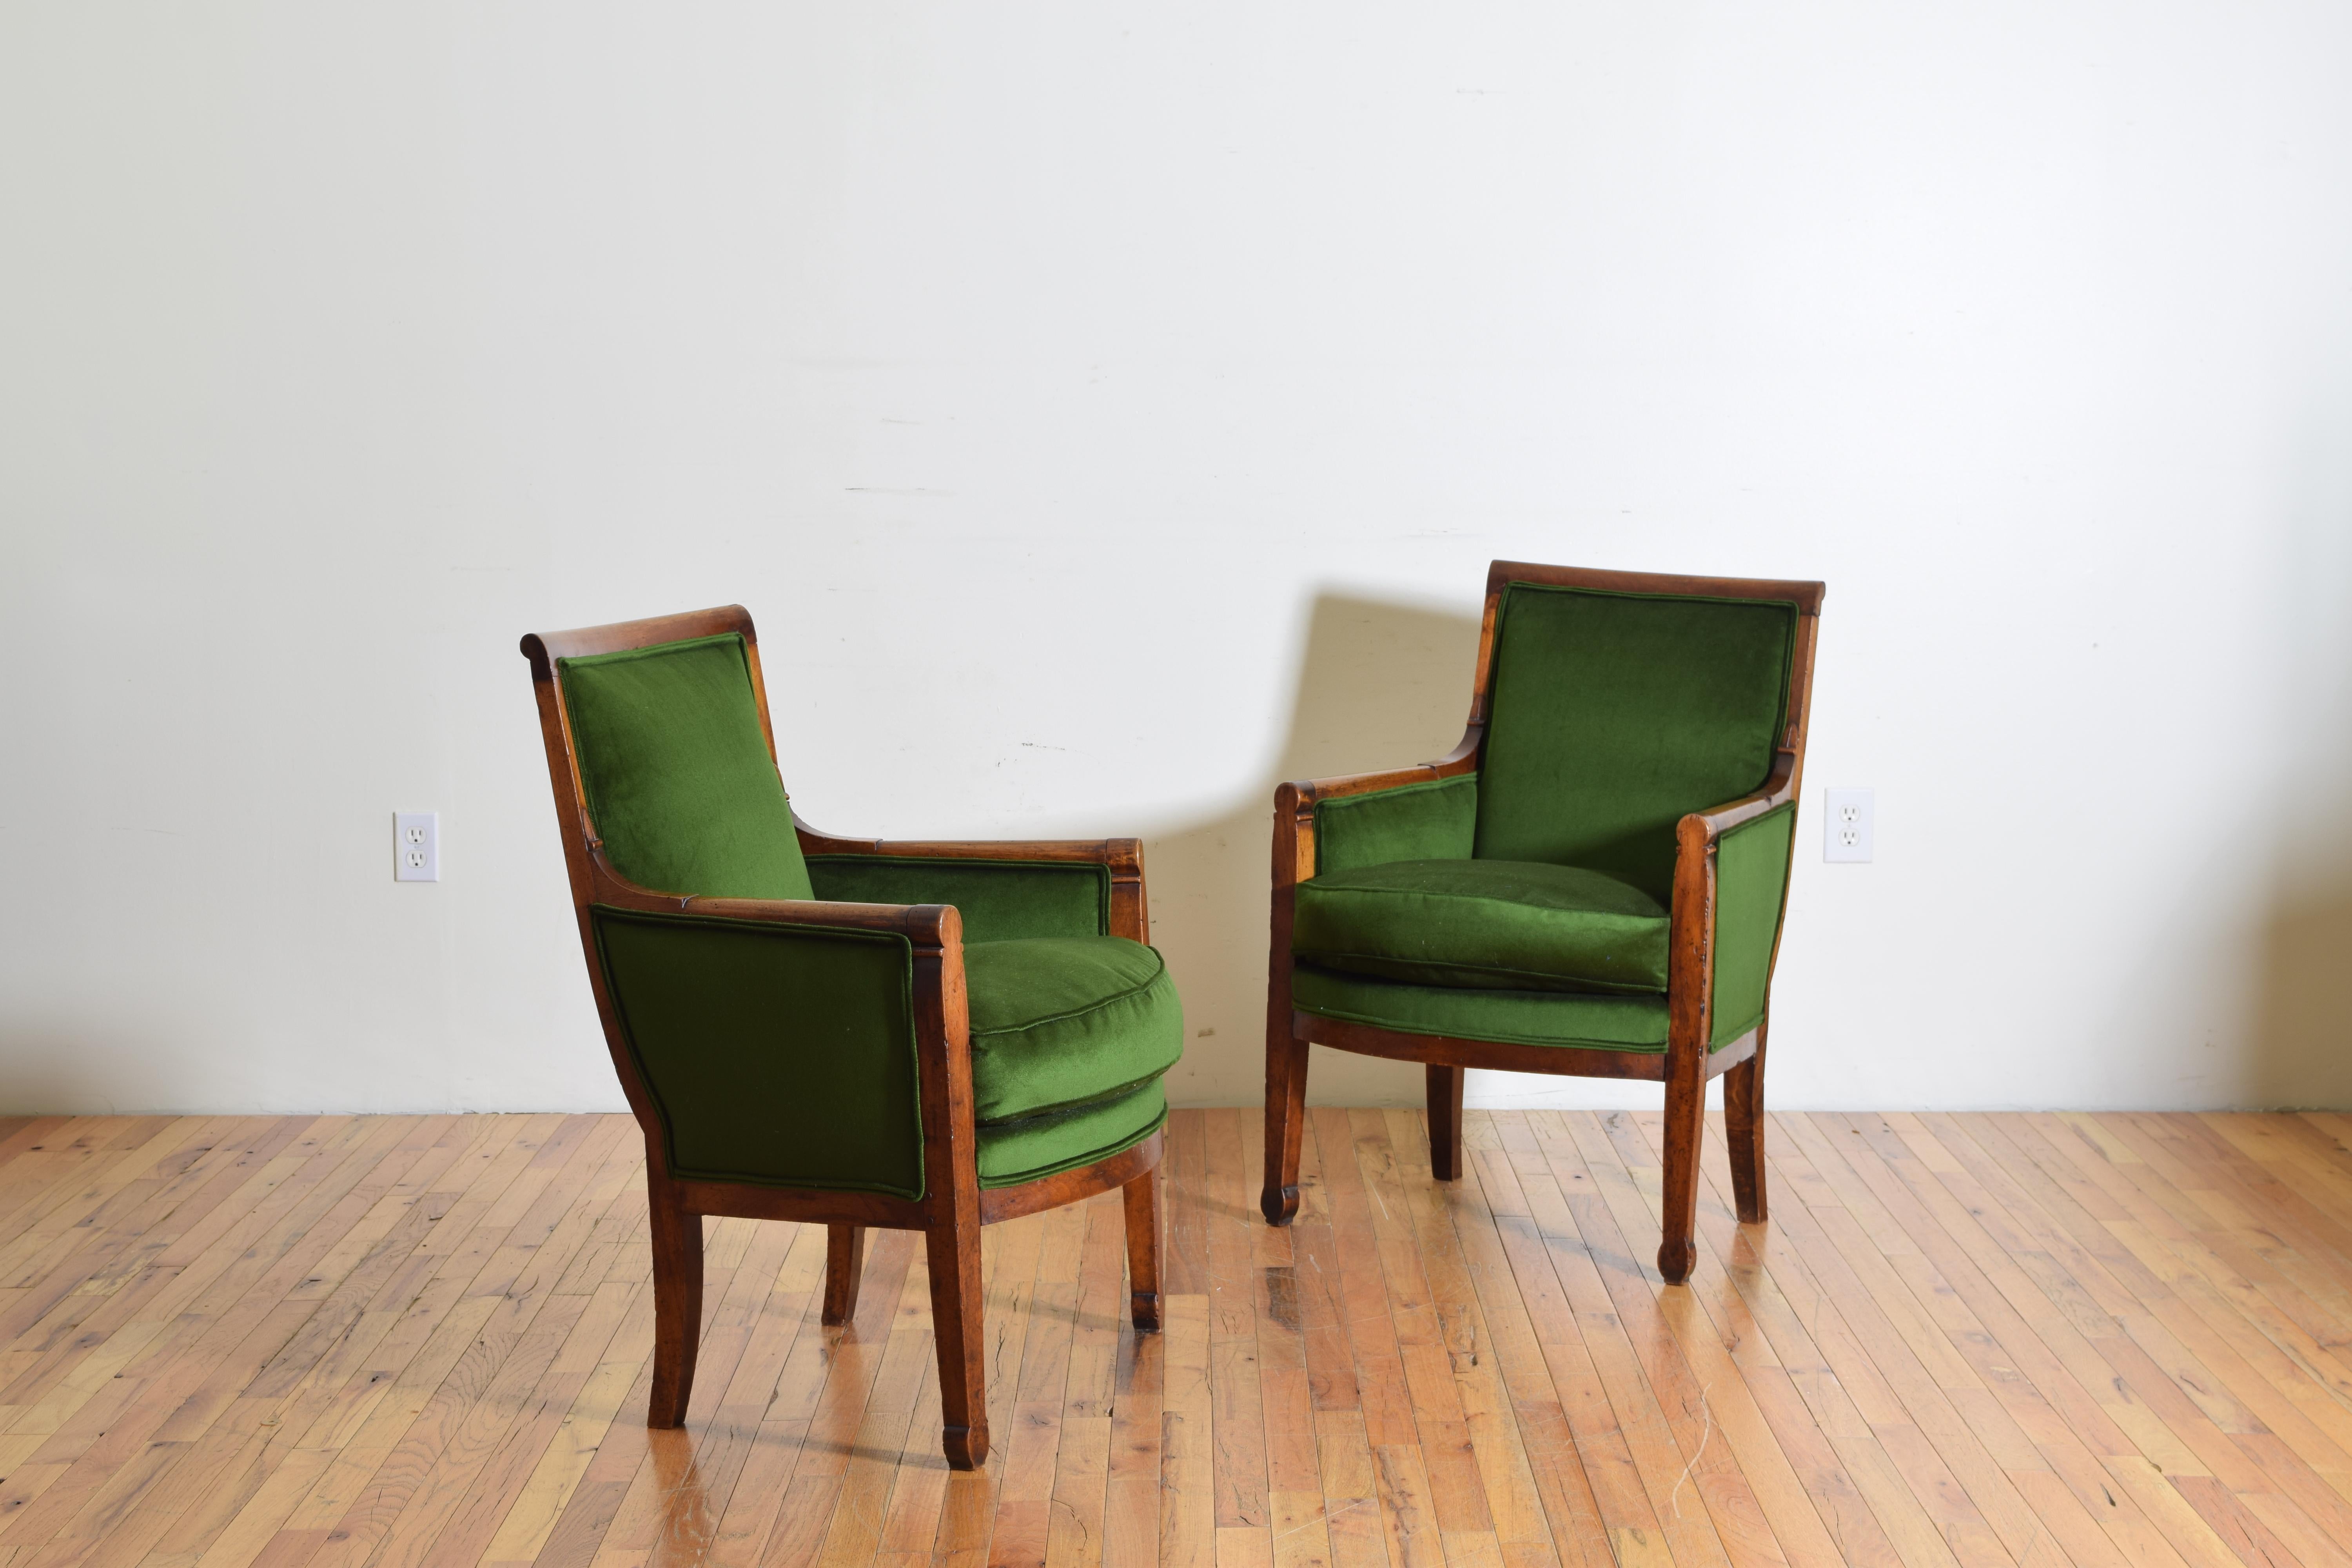 French restauration period pair of walnut and upholstered Bergeres, circa 1825. Upholstered in green velvet.